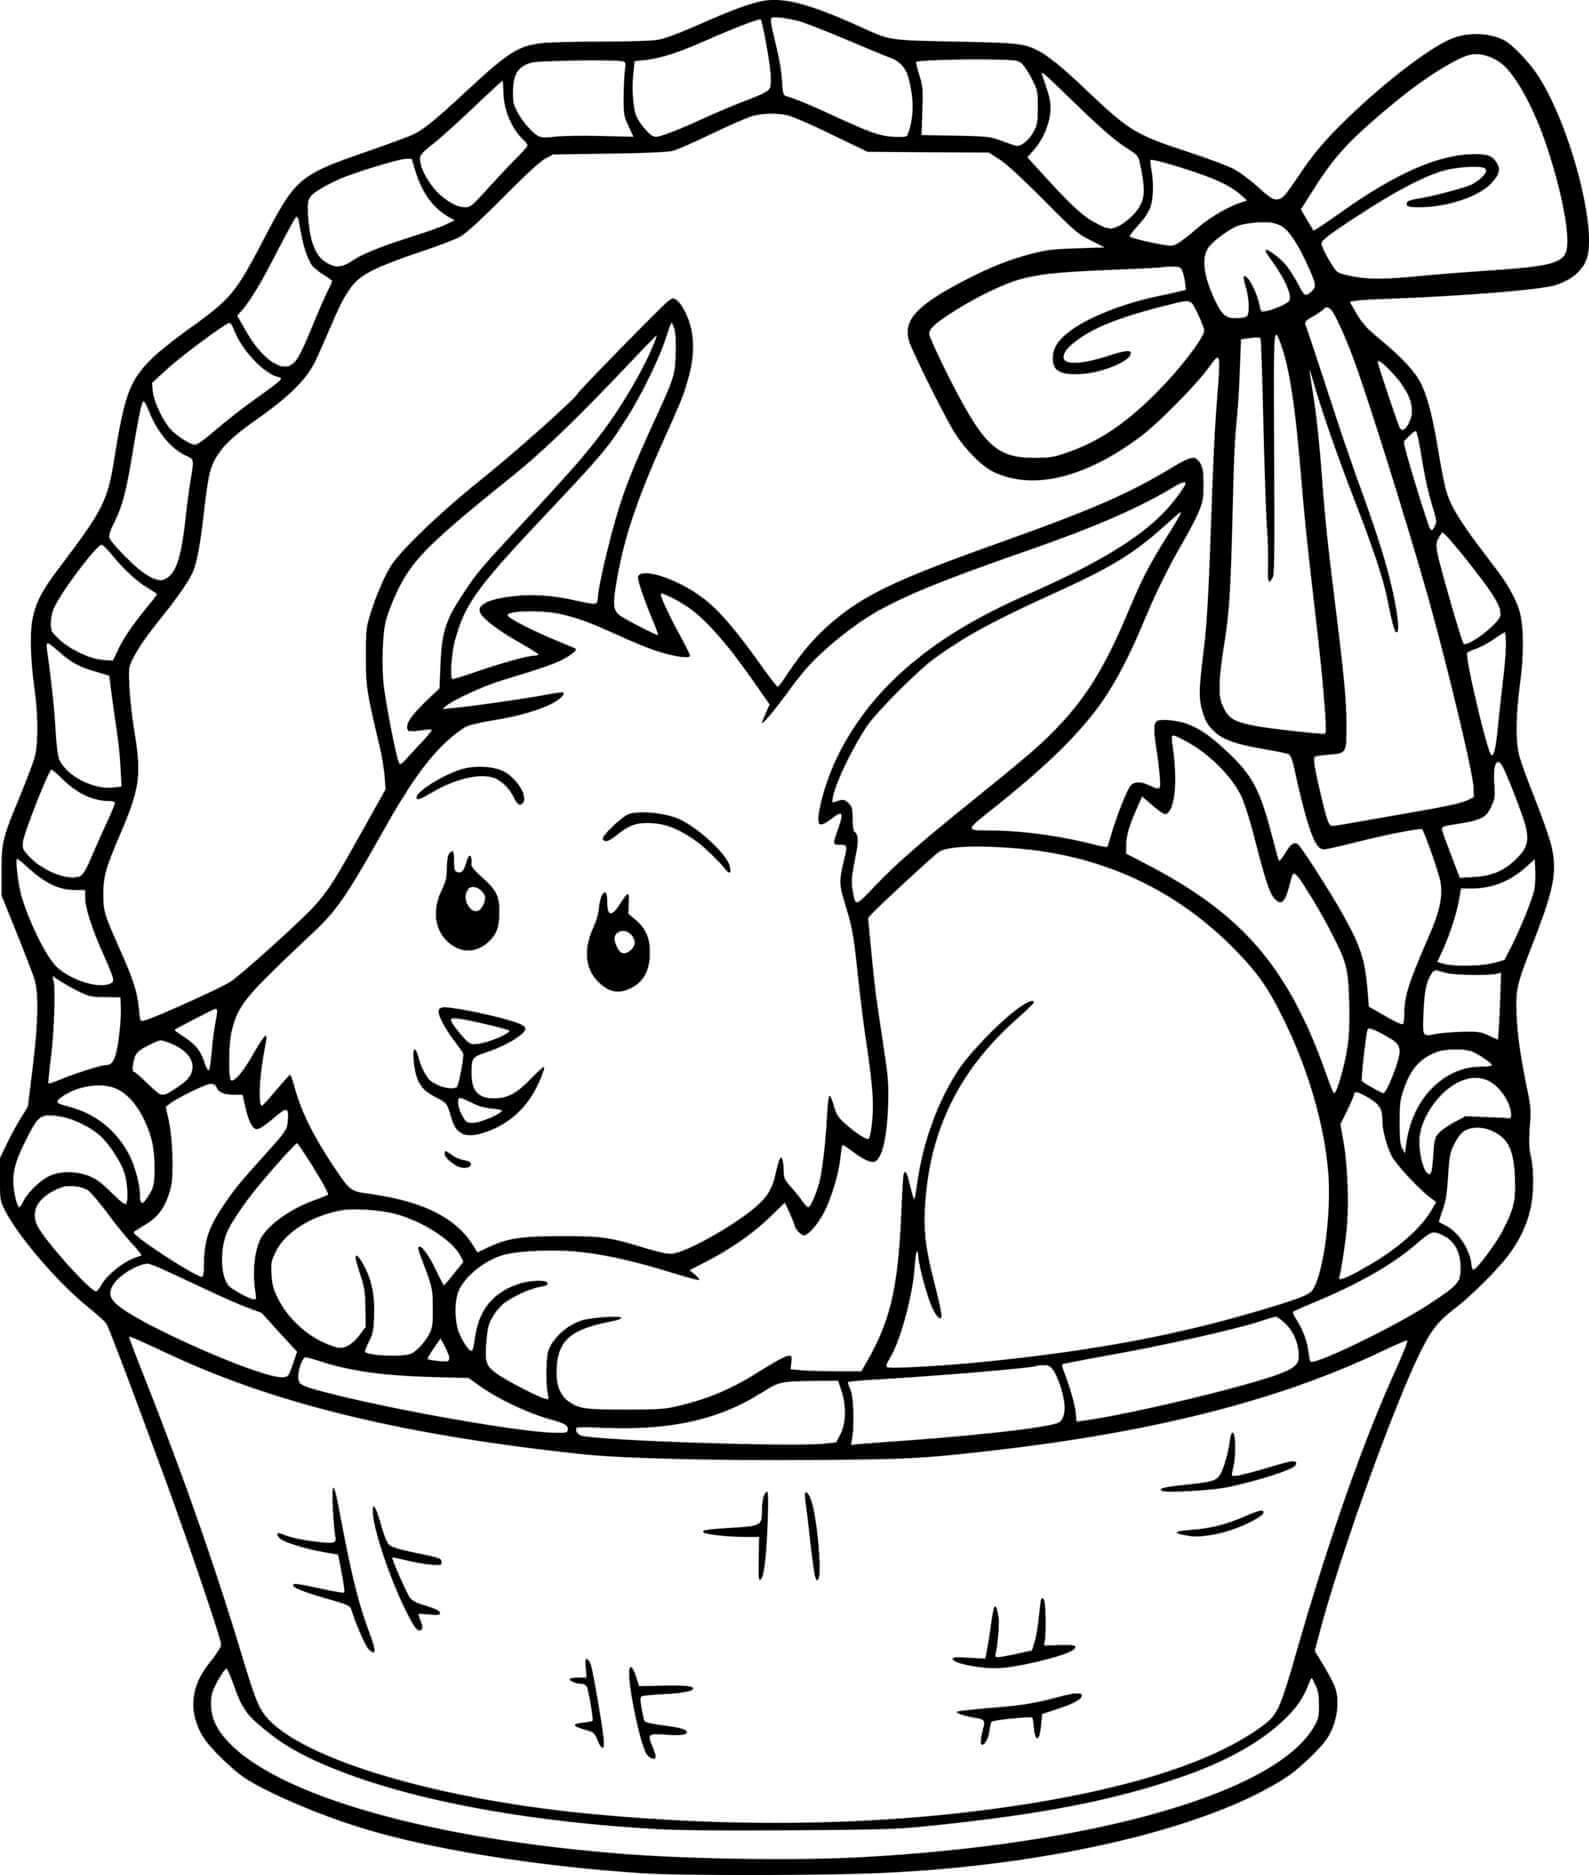 Soft Bunny In The Easter Basket